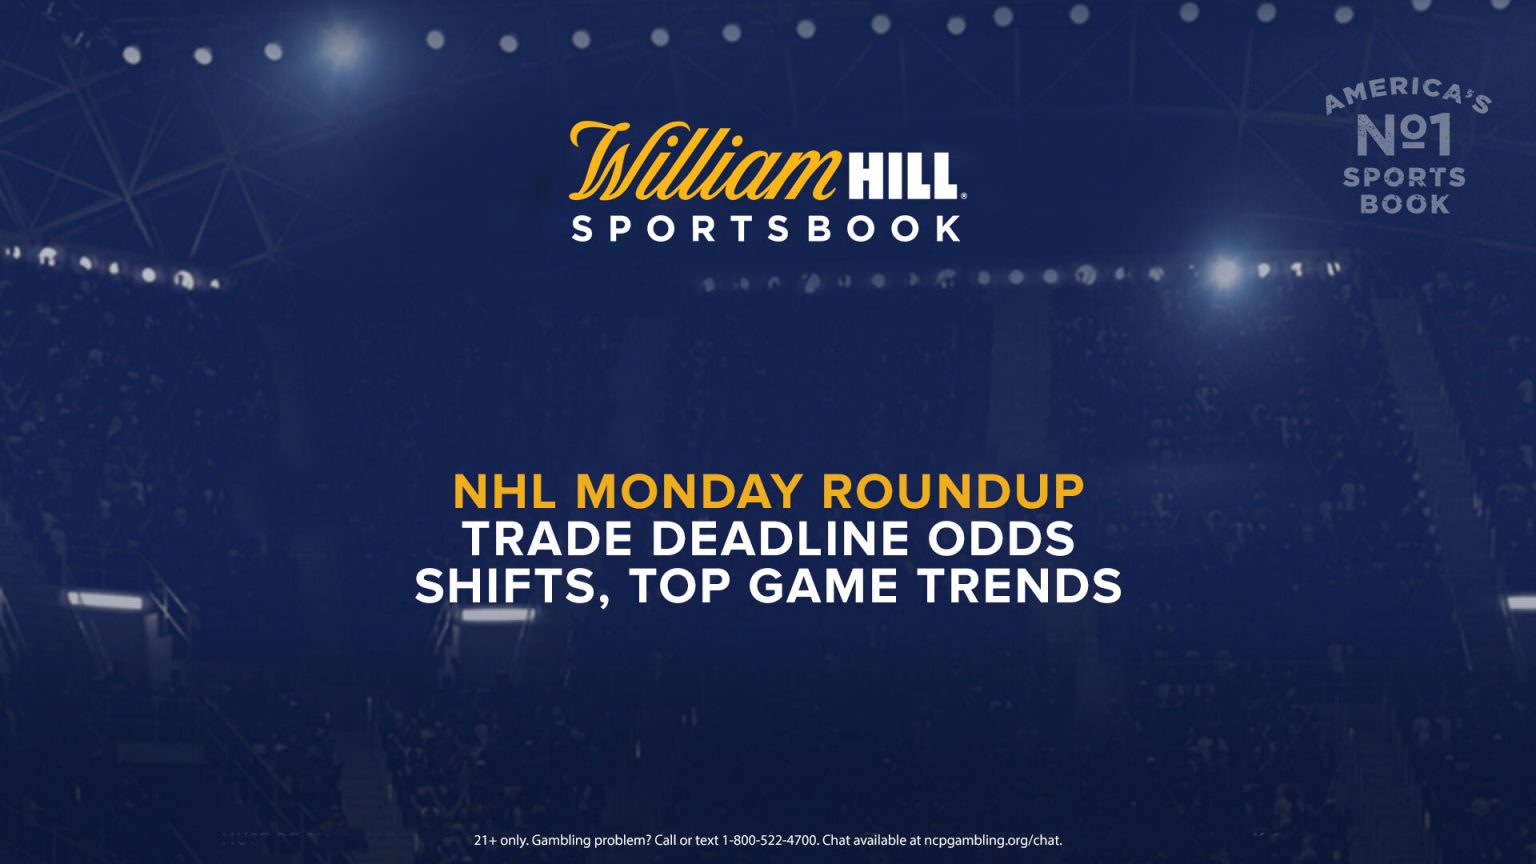 NHL Monday Roundup Trade Deadline Odds Shifts, Top Game Trends